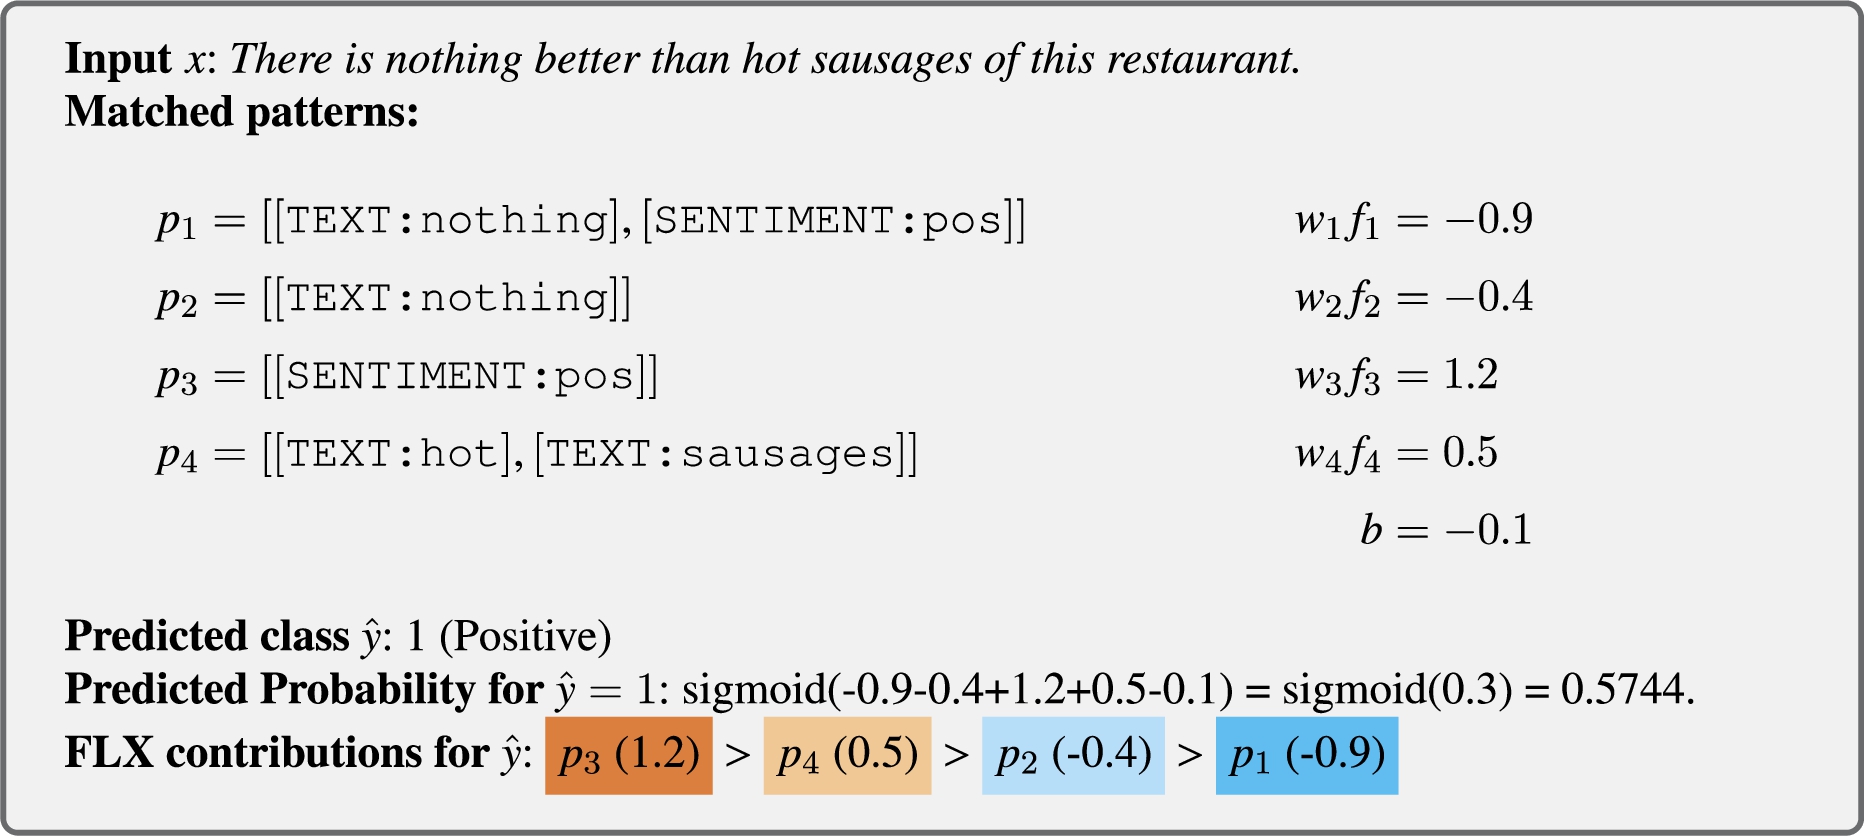 An illustrative example of using pattern-based logistic regression for sentiment analysis. (Here, FLX stands for flat logistic regression explanation, see Section 3.)